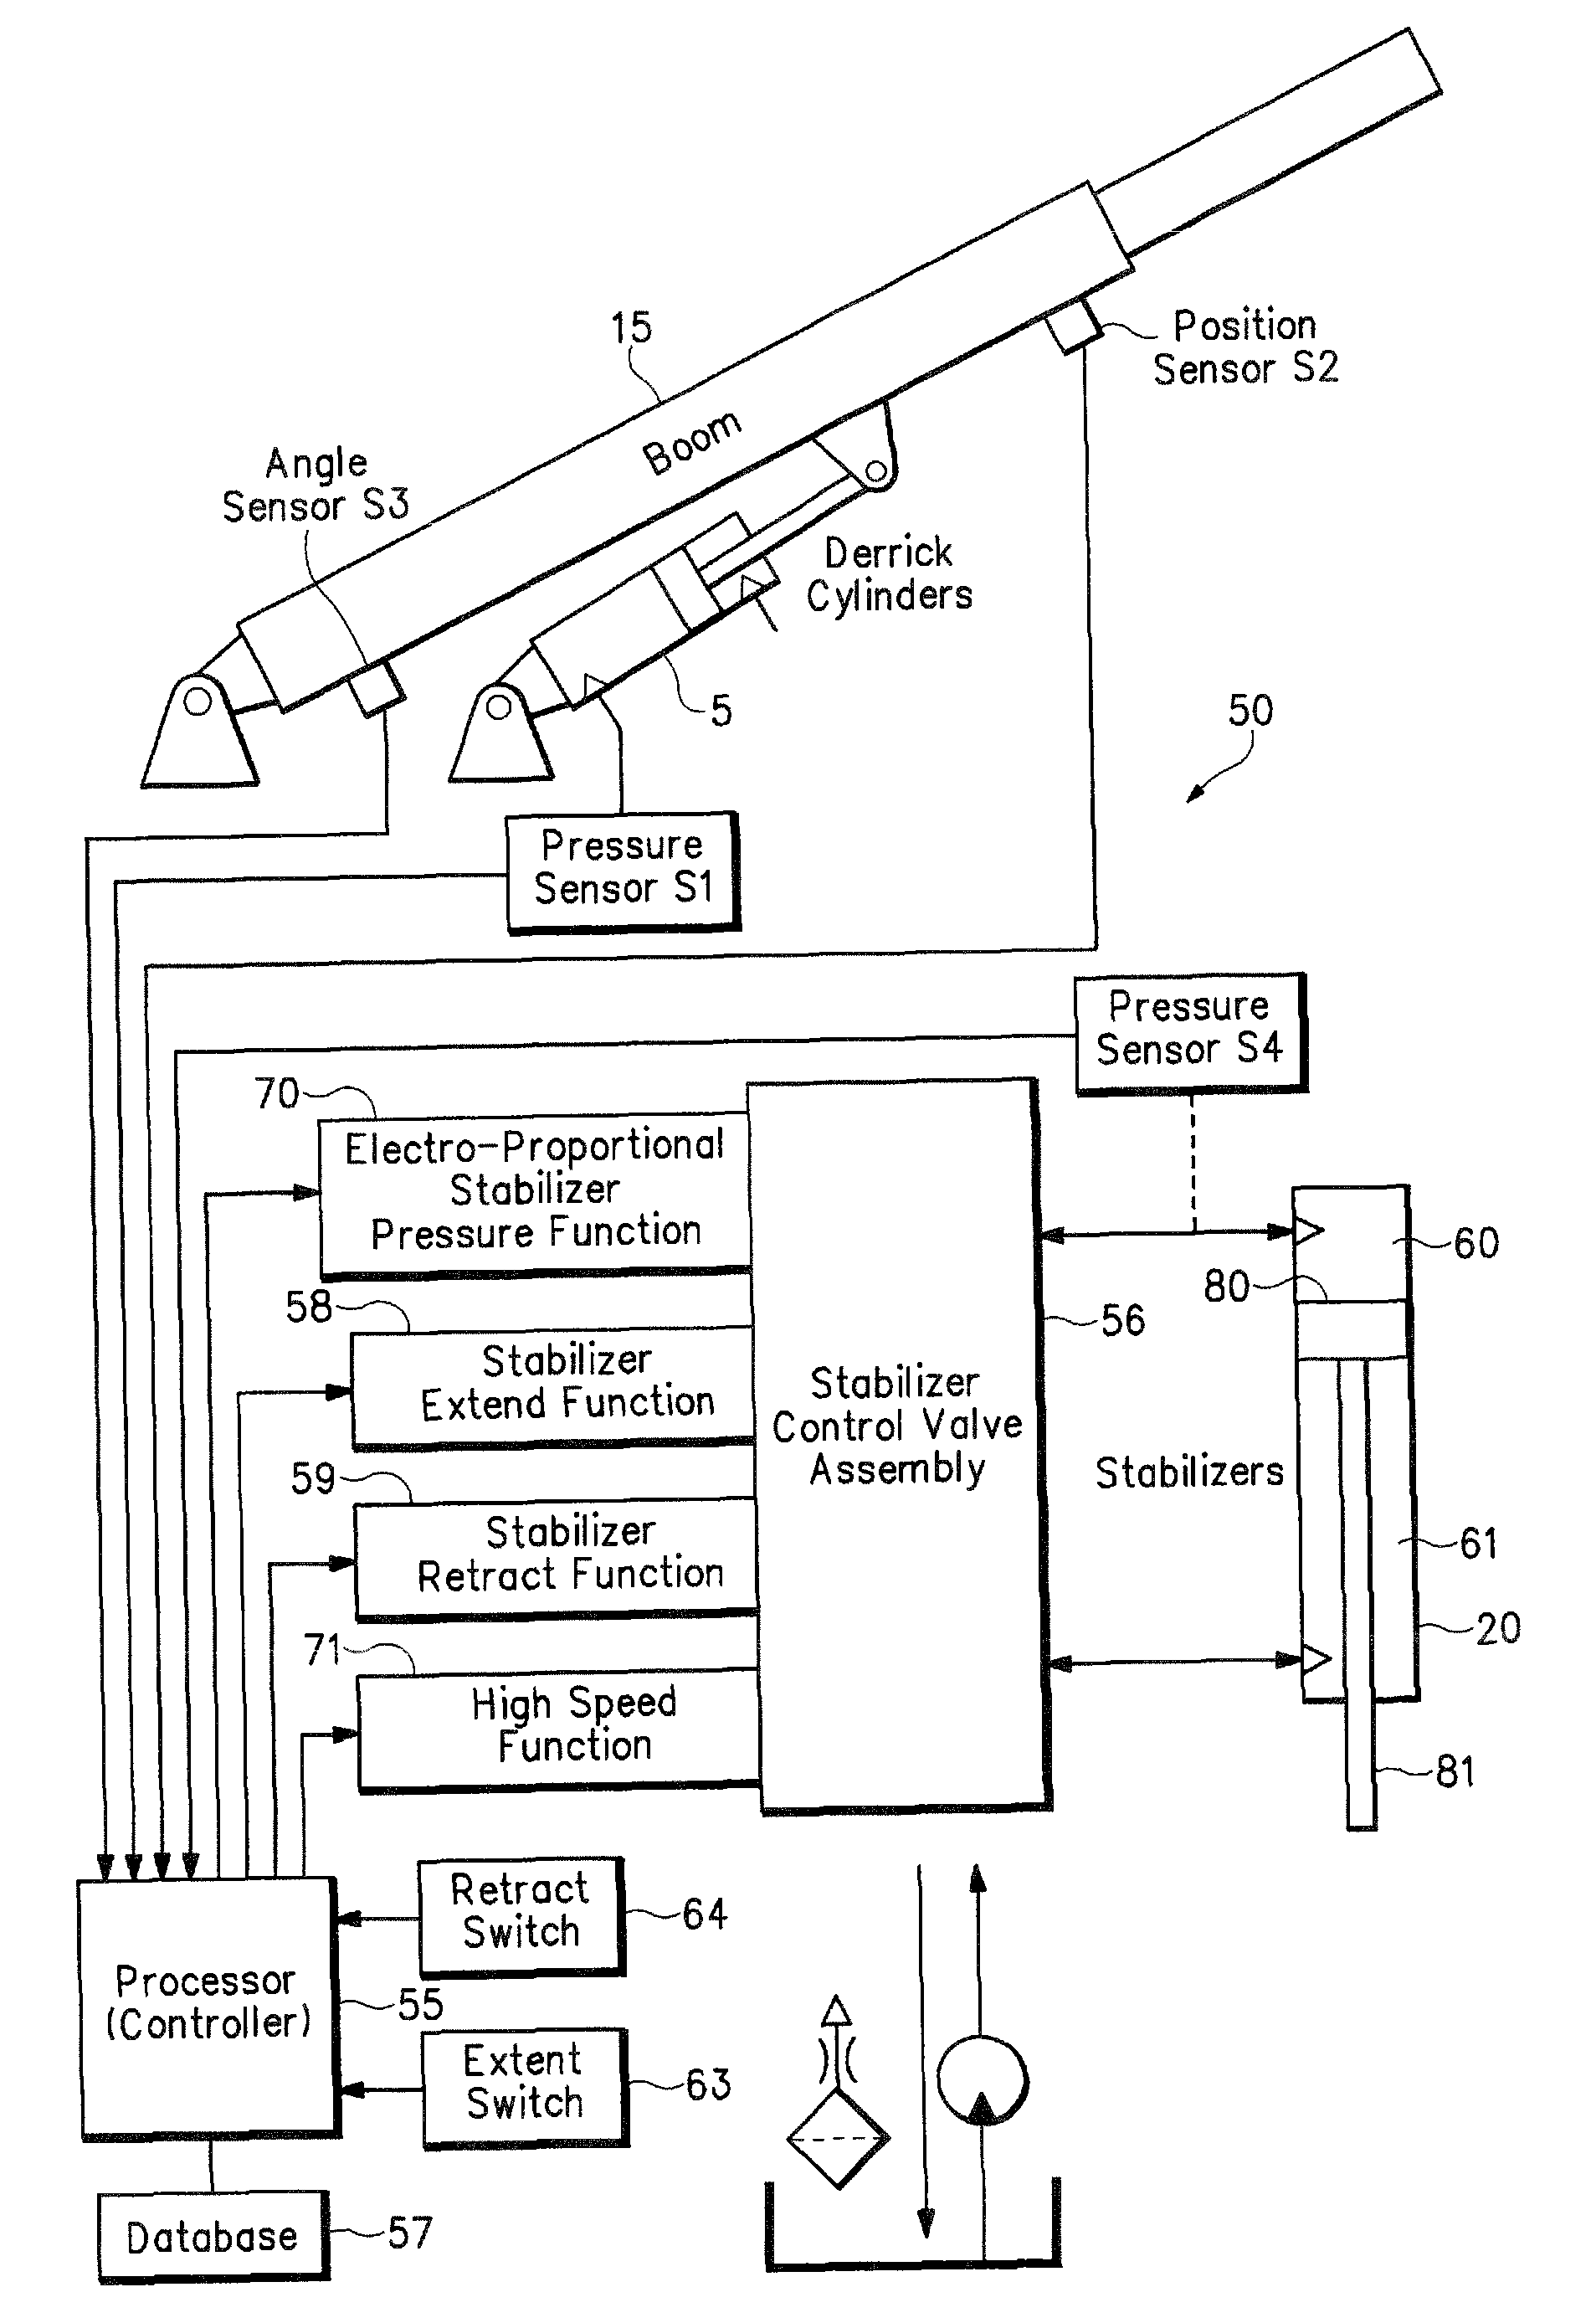 Load controlled stabilizer system